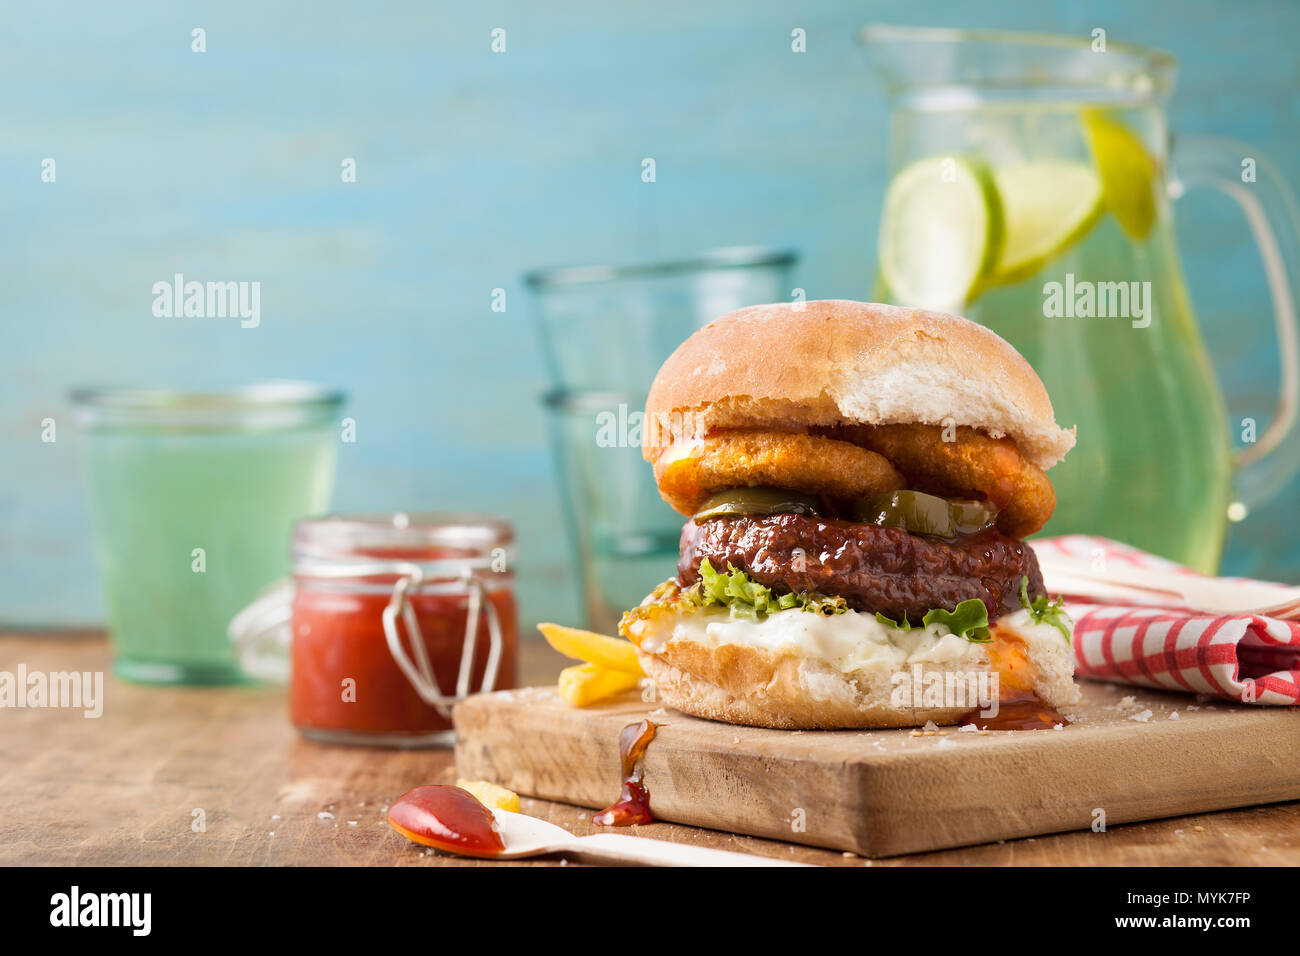 Burger in a bun with onion rings, chips and ketchup with a summery blue background Stock Photo